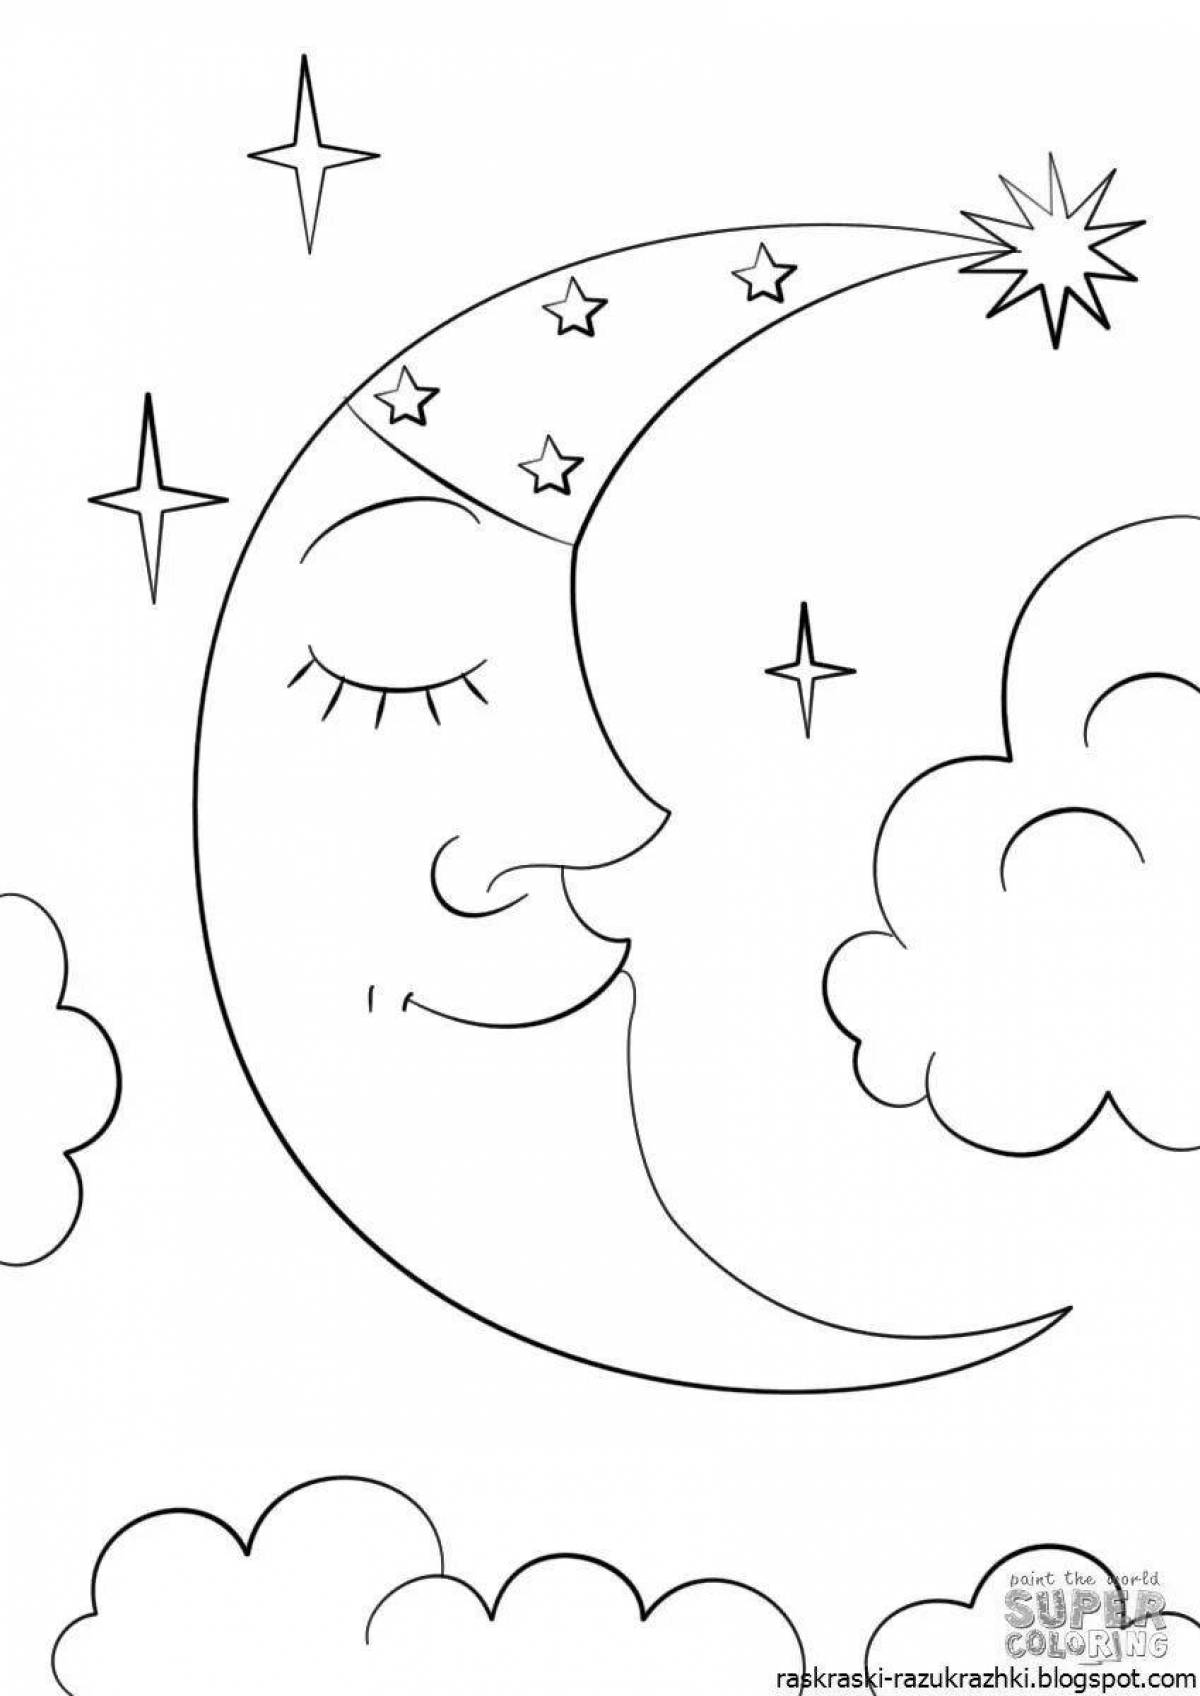 Glowing crescent moon coloring page